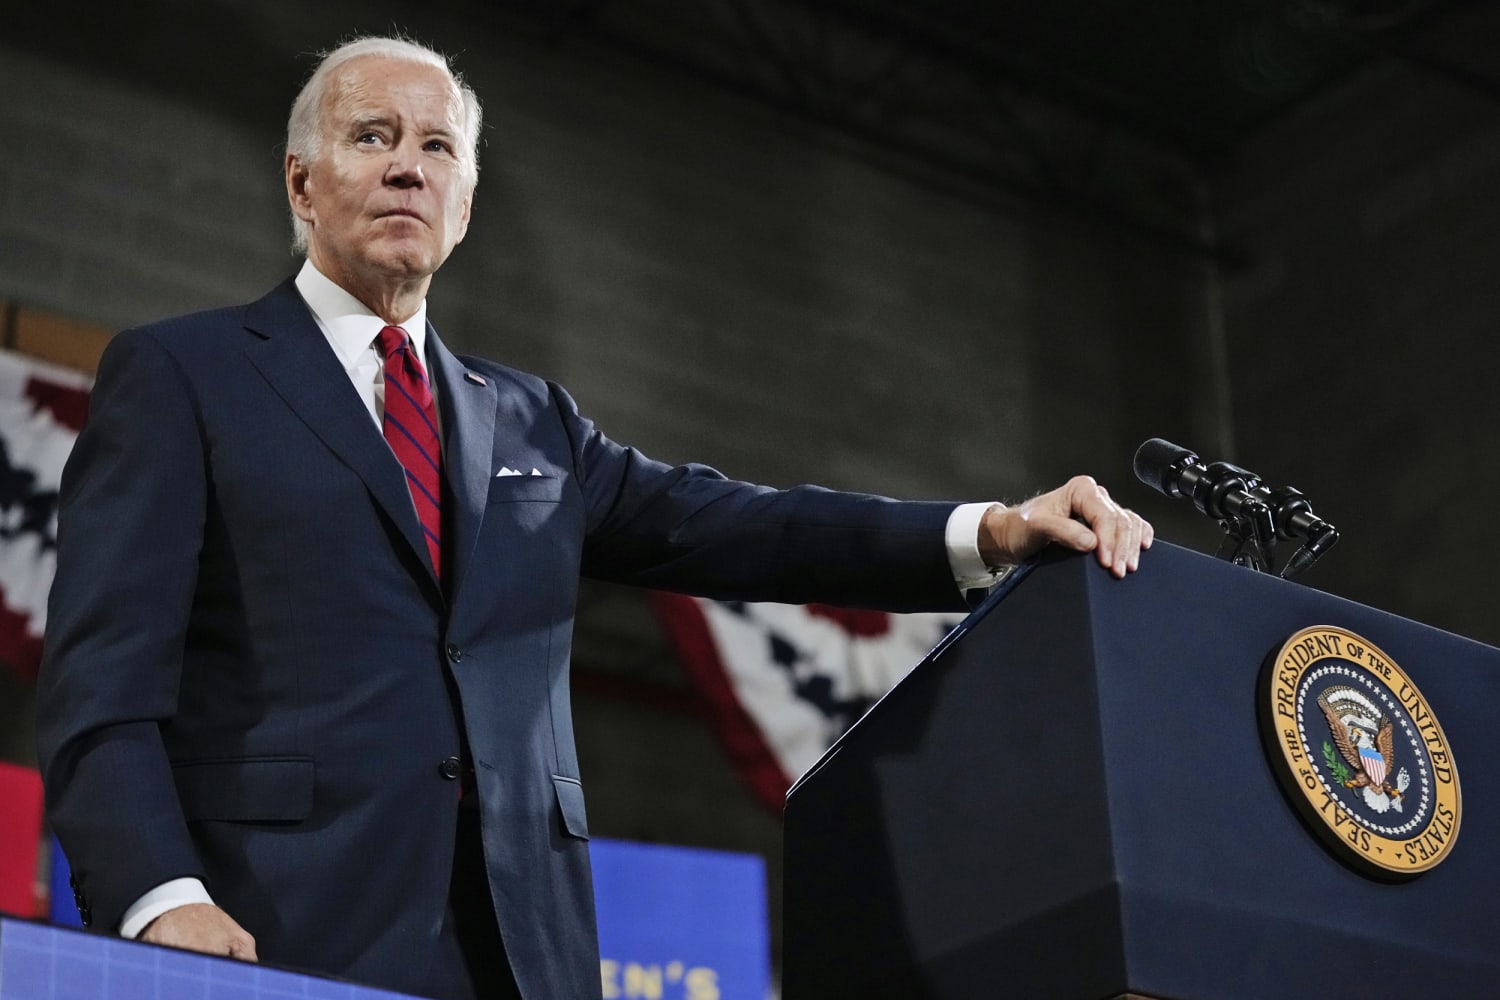 Biden's notebooks among items seized by FBI in Delaware home search